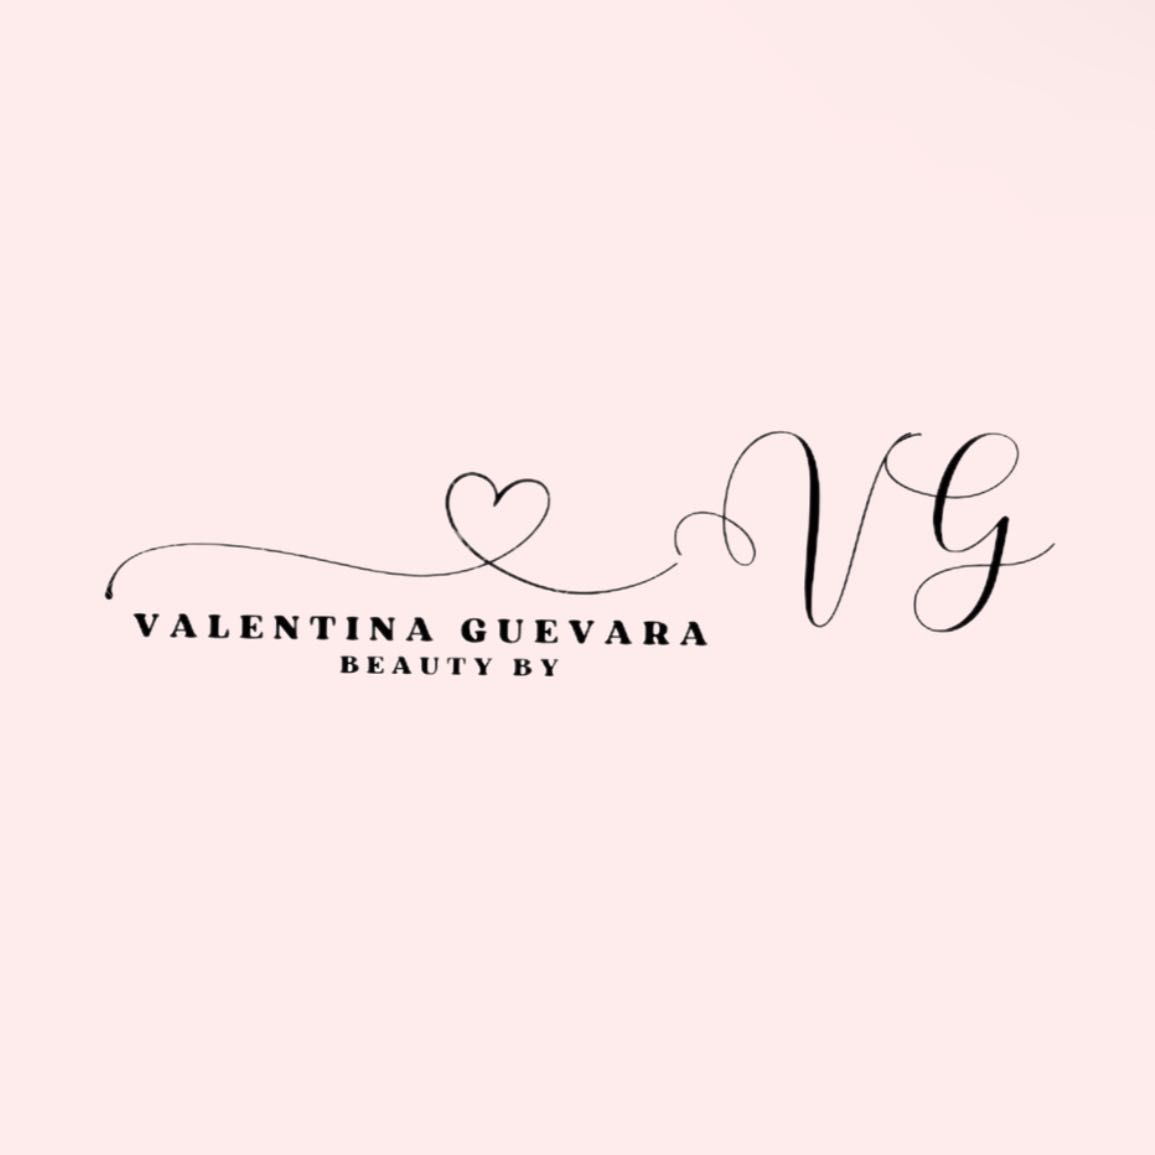 BEAUTY BY VALENTINA, 4990 Old Spartanburg Rd, Taylors, 29687